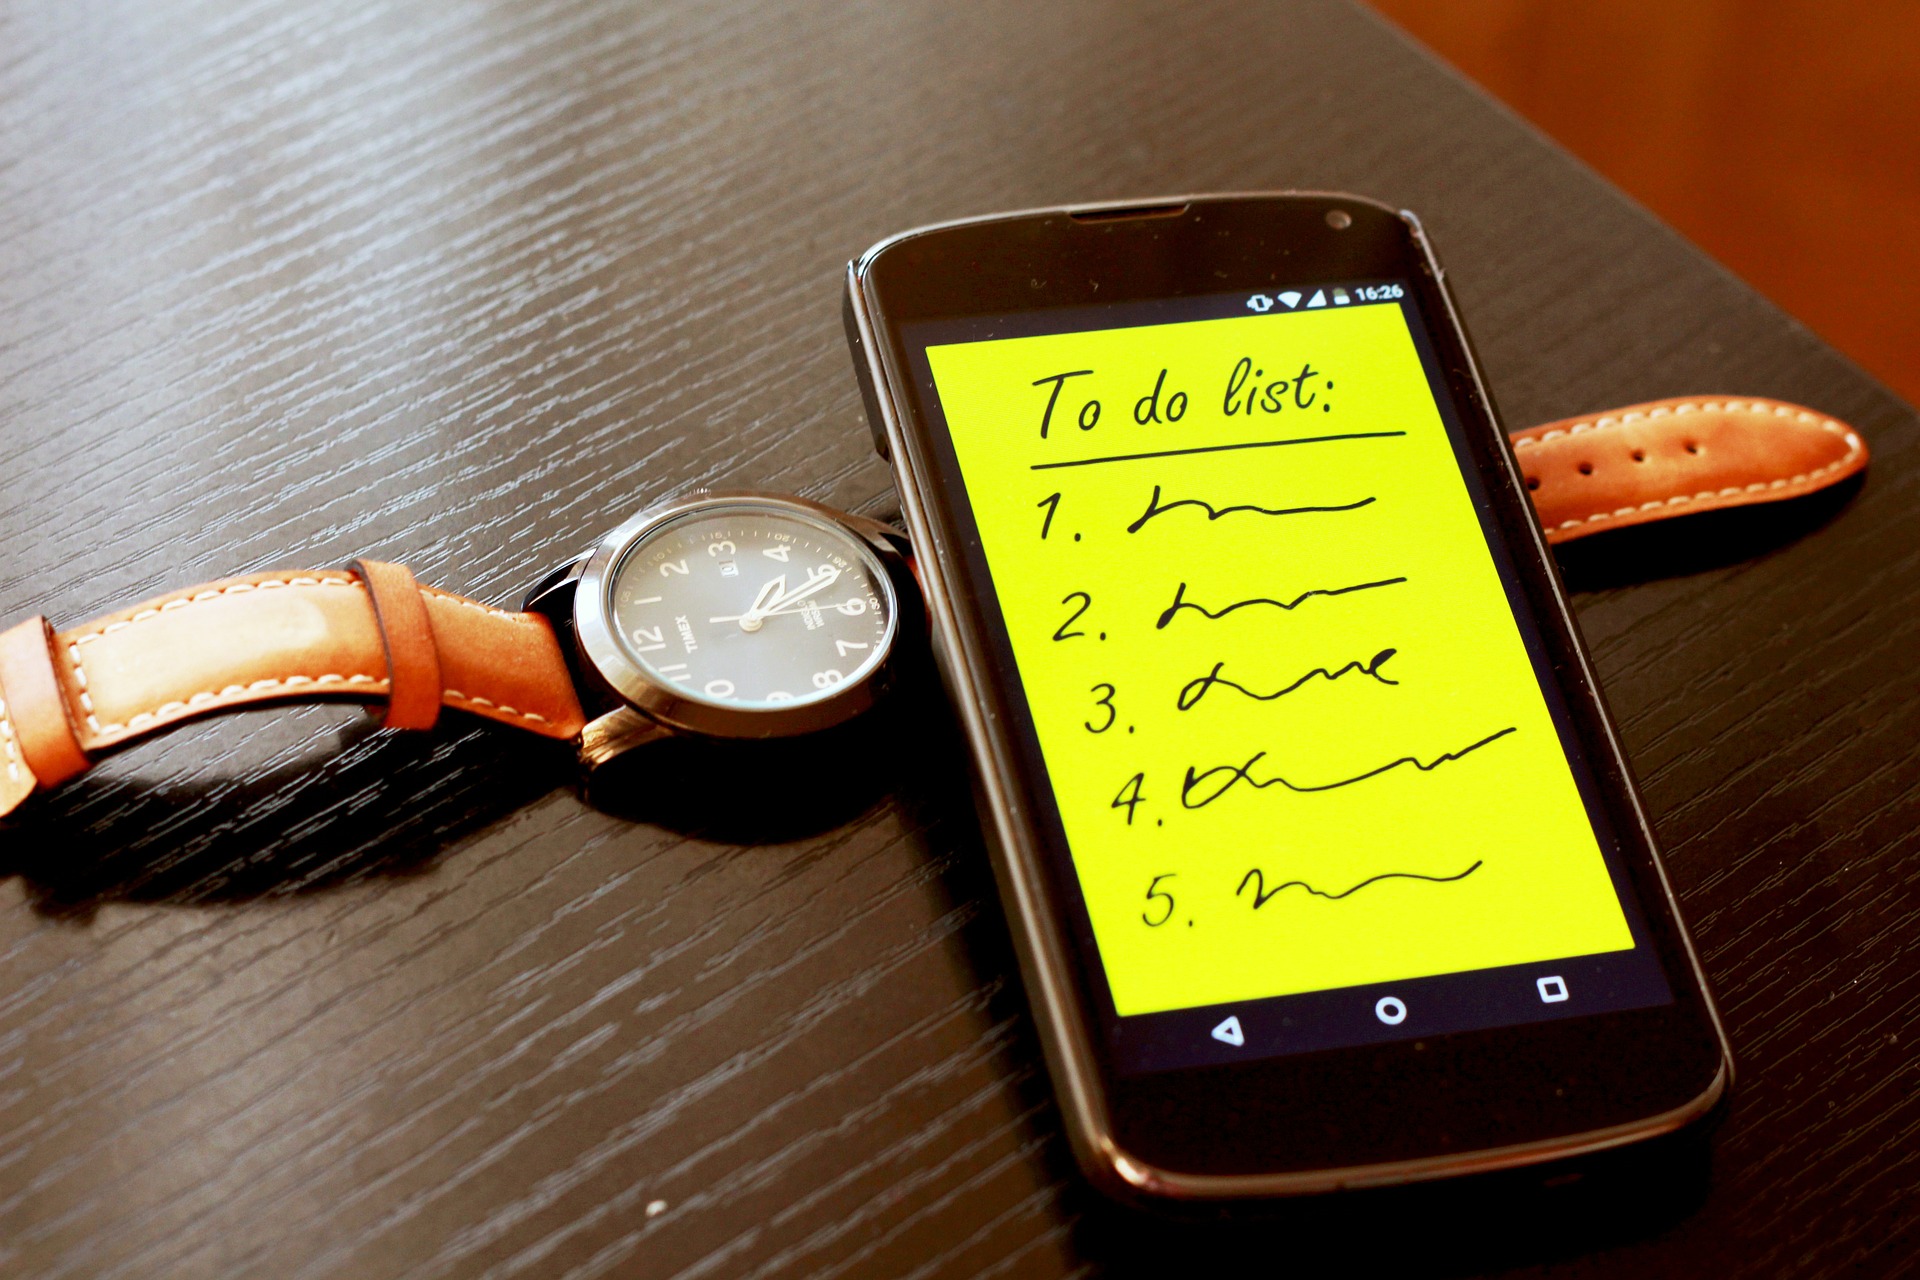 To do list on a phone with a watch.